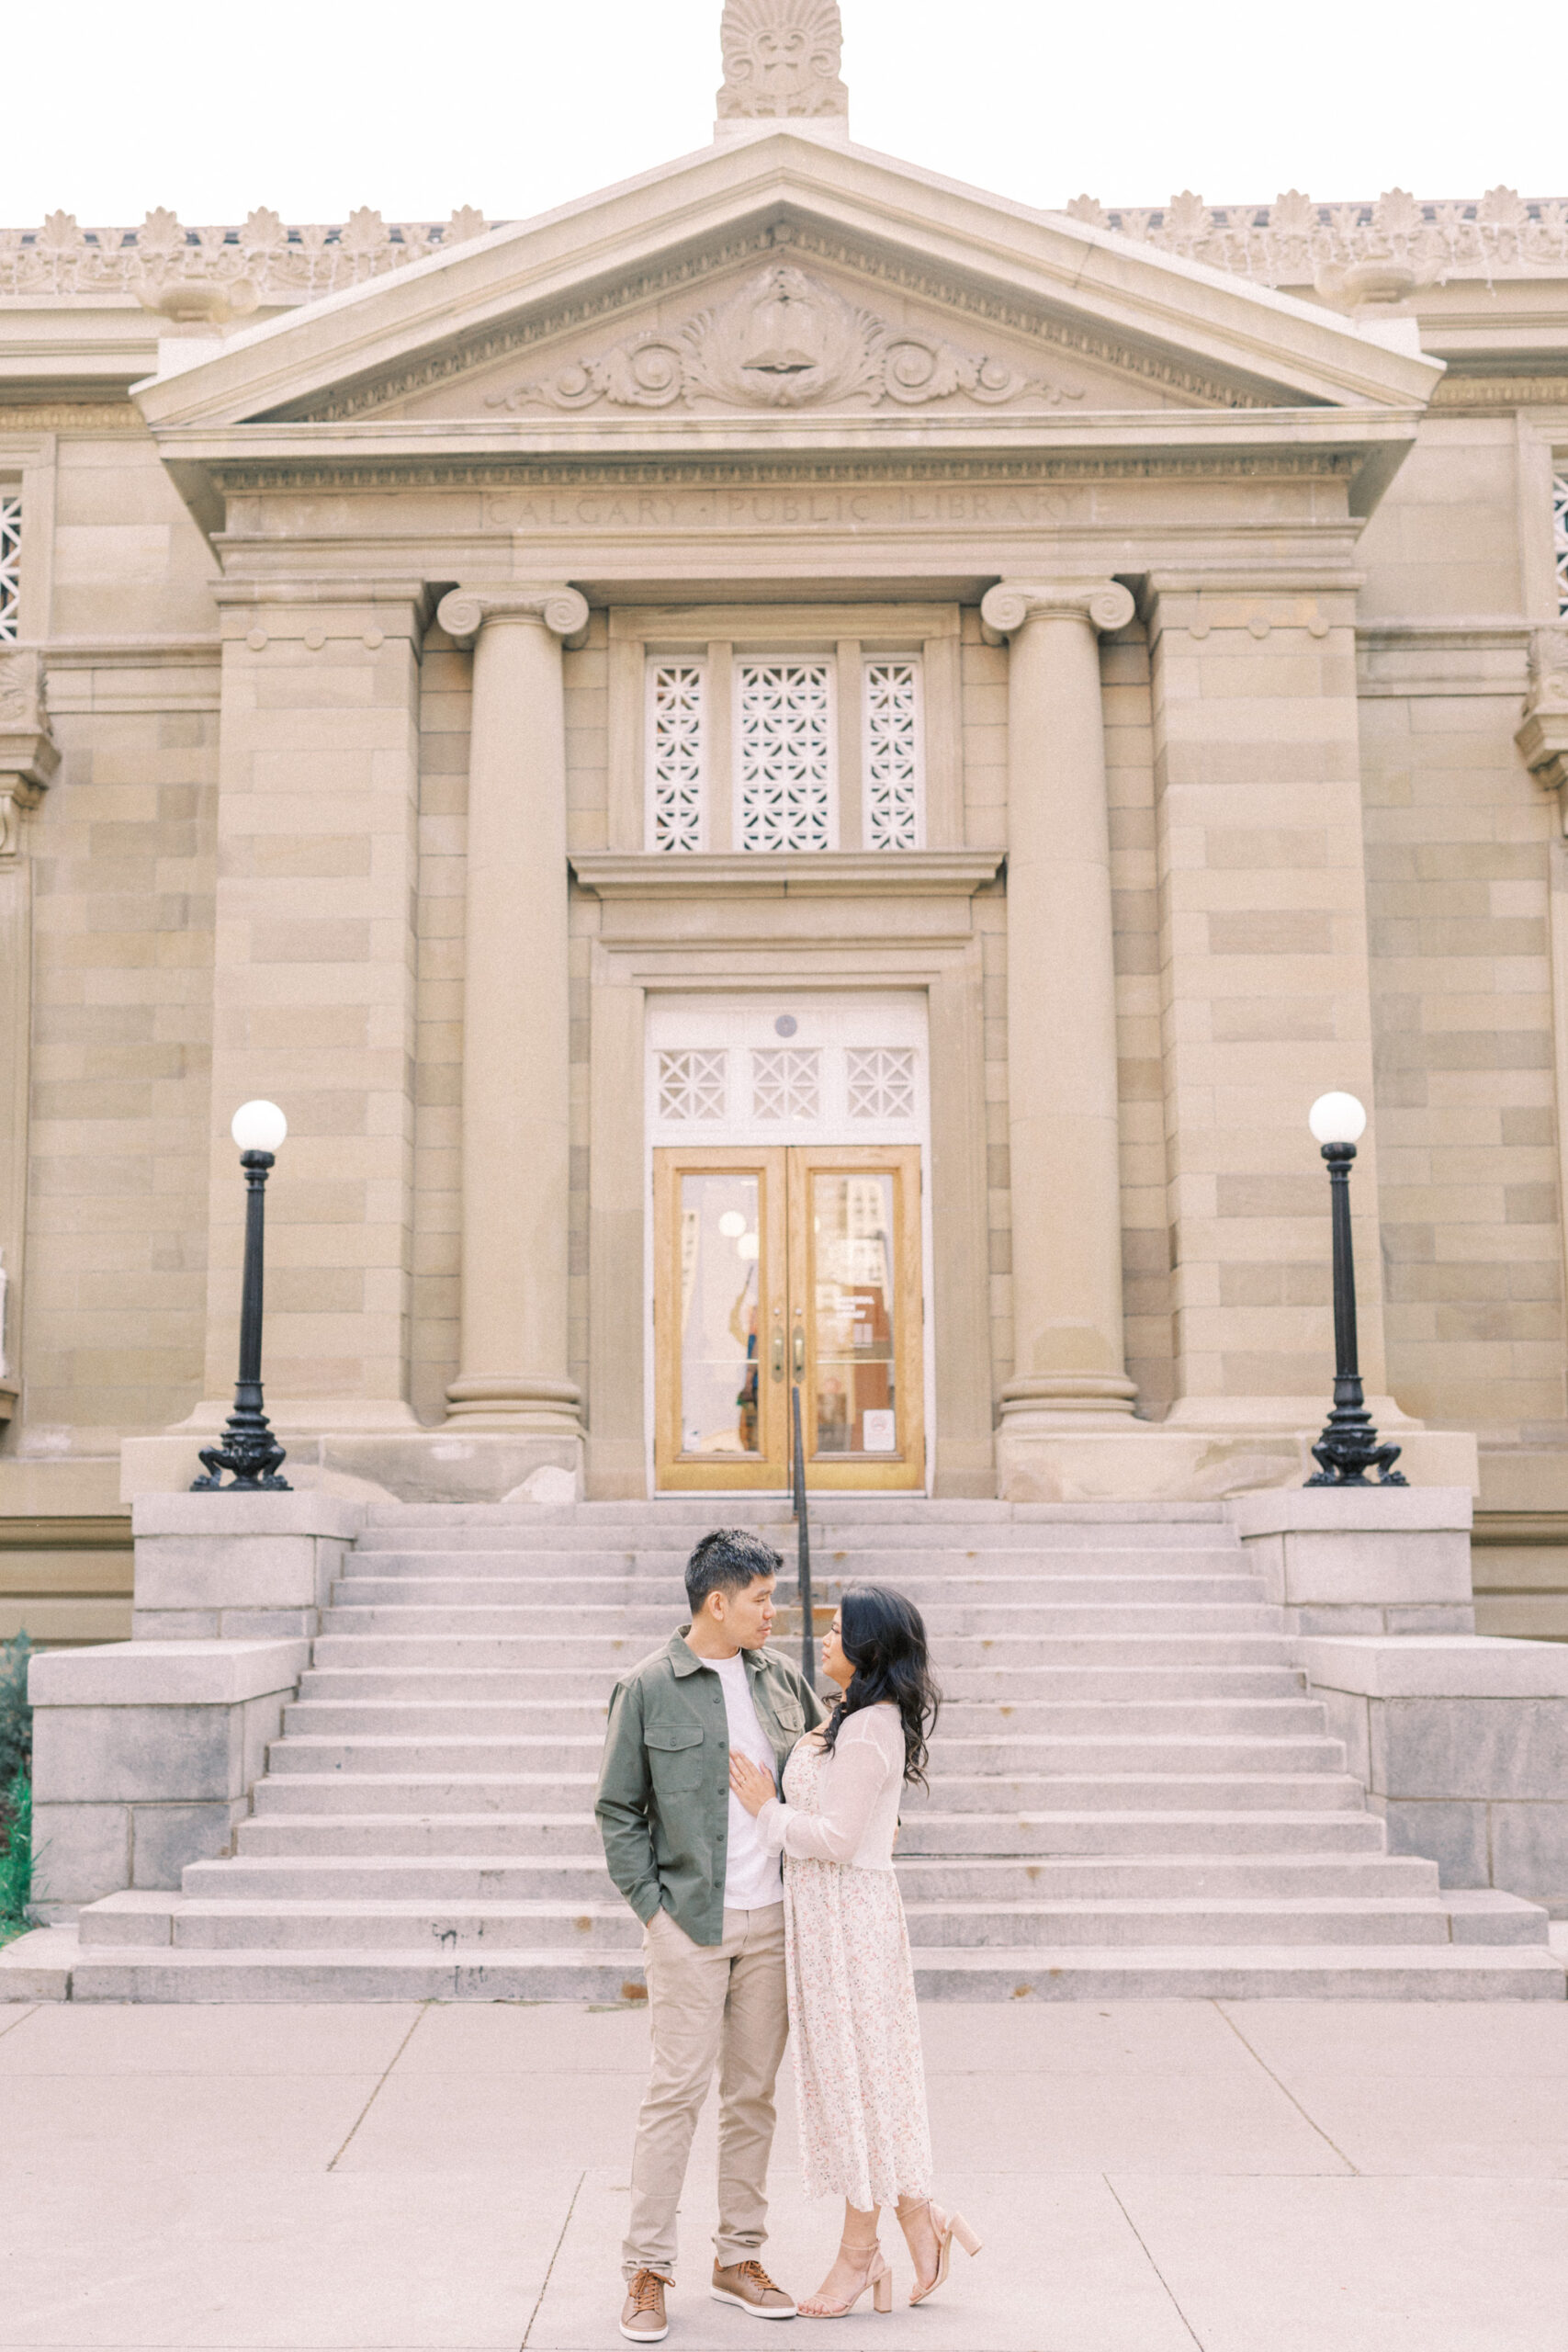 Urban Calgary Engagement Session, Central memorial library, sunset urban engagement, nicole sarah engagemet, affordable wedding photographers, award winning wedding photographers, film wedding photographers, couple laughing and dancing in park, engagement inspiration, nicole sarah, engagement session, engagement wardrobe, arizona wedding photographer, alberta wedding photographers